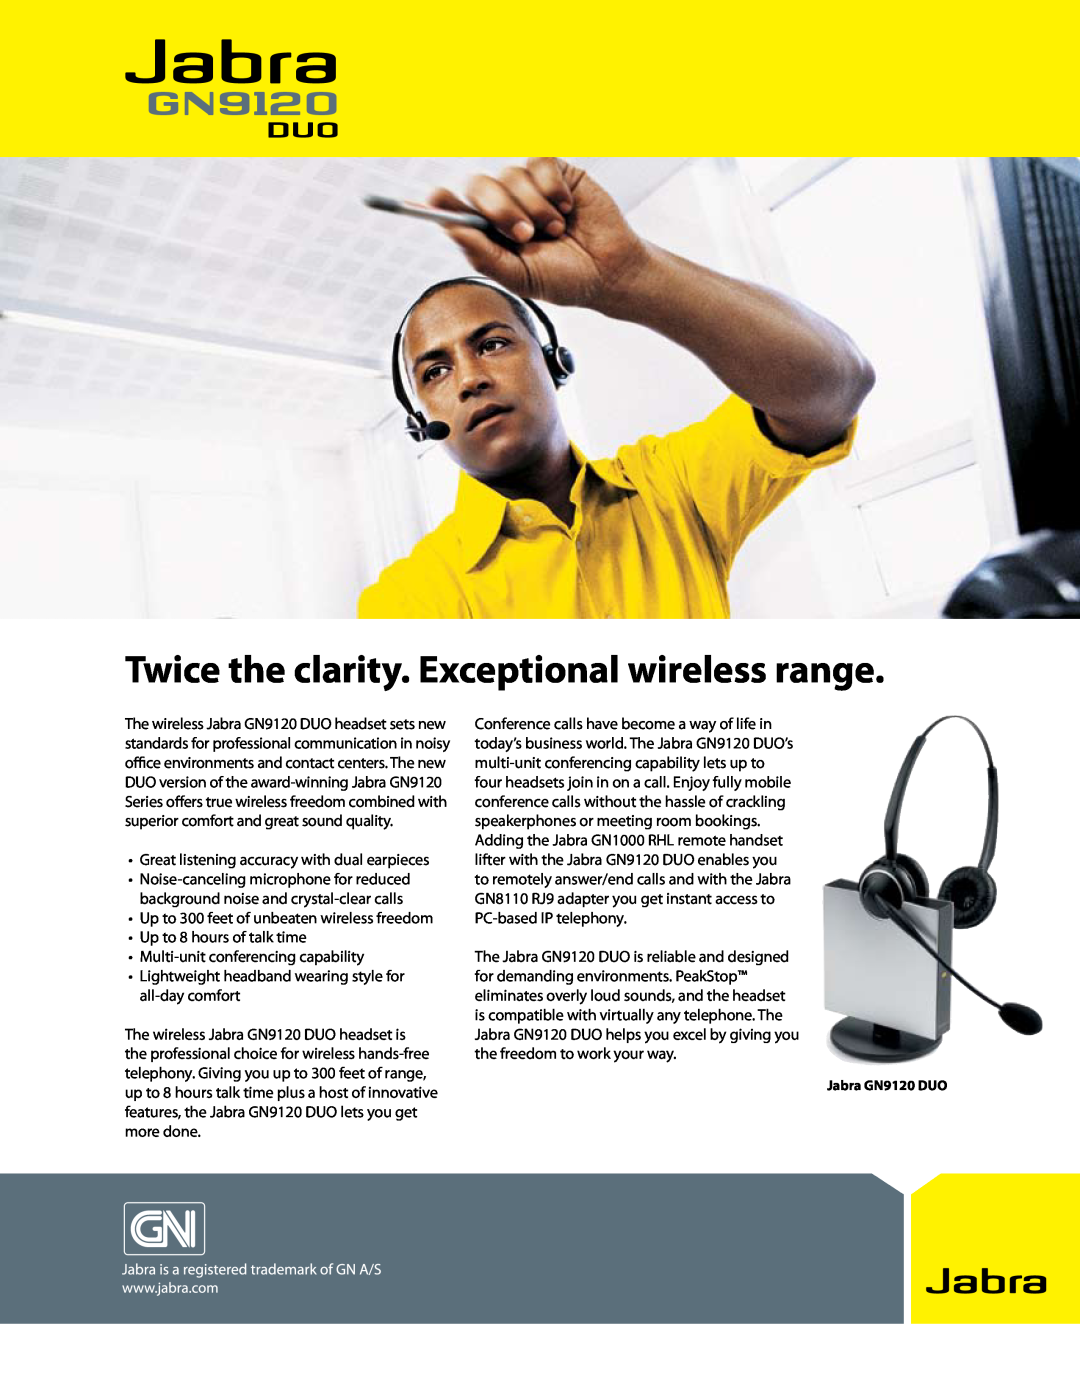 Jabra manual jabra, Jabra GN9120 DUO, Twice the clarity. Exceptional wireless range, Up to 8 hours of talk time 